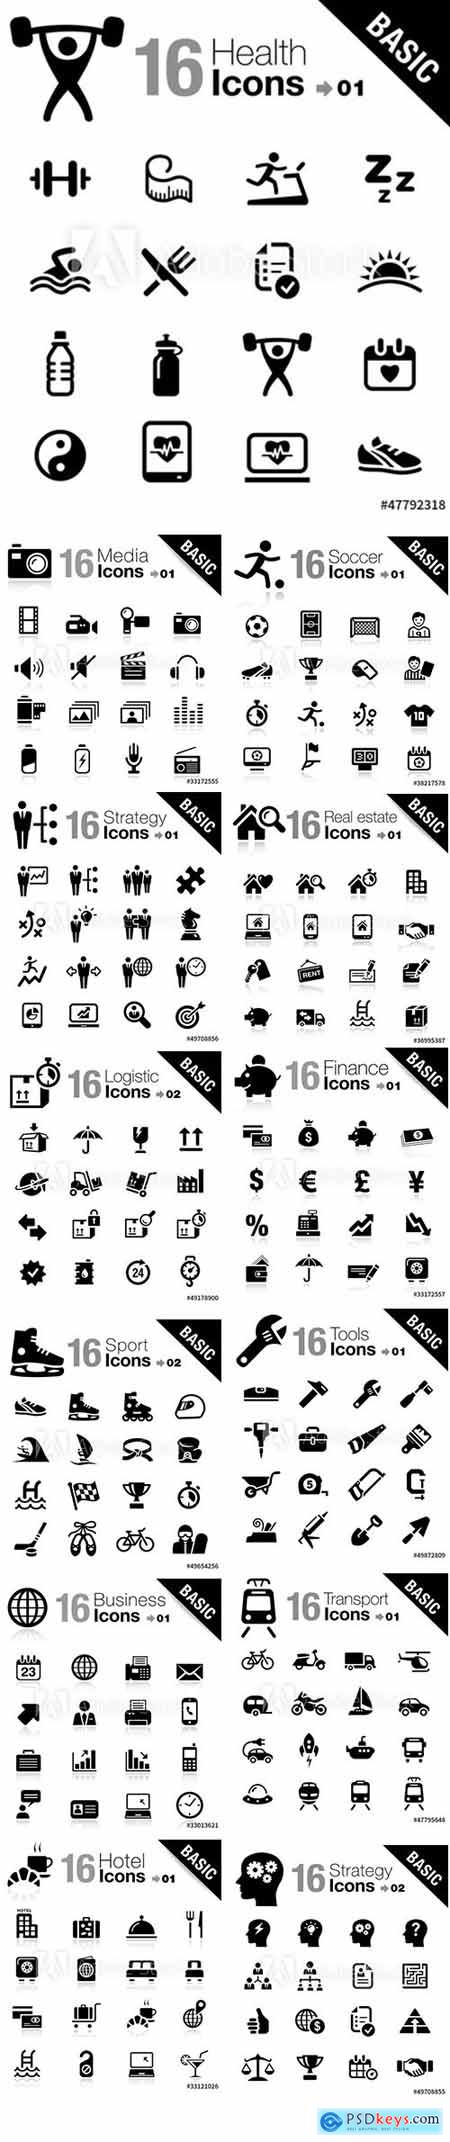 Vector Icons Set - Basic Icons Pack Vol 2